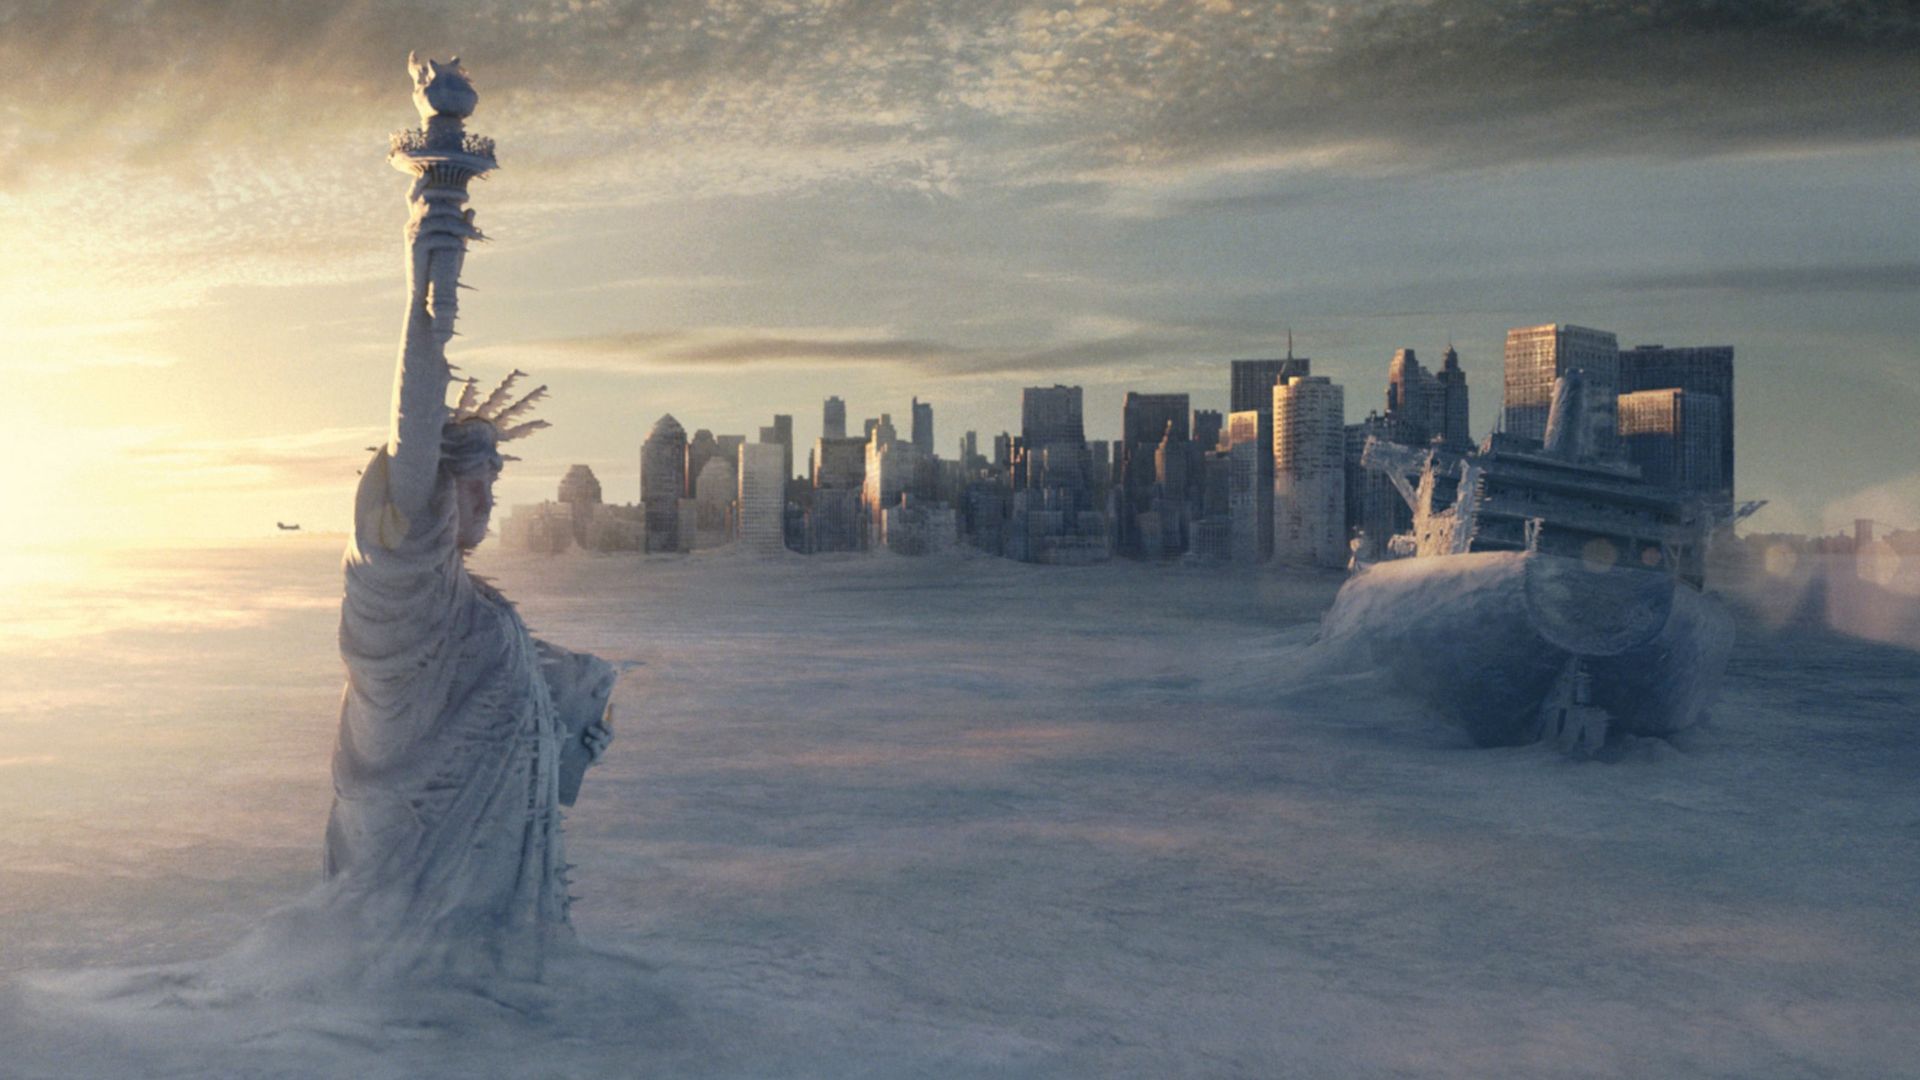 The Day After Tomorrow Backdrop